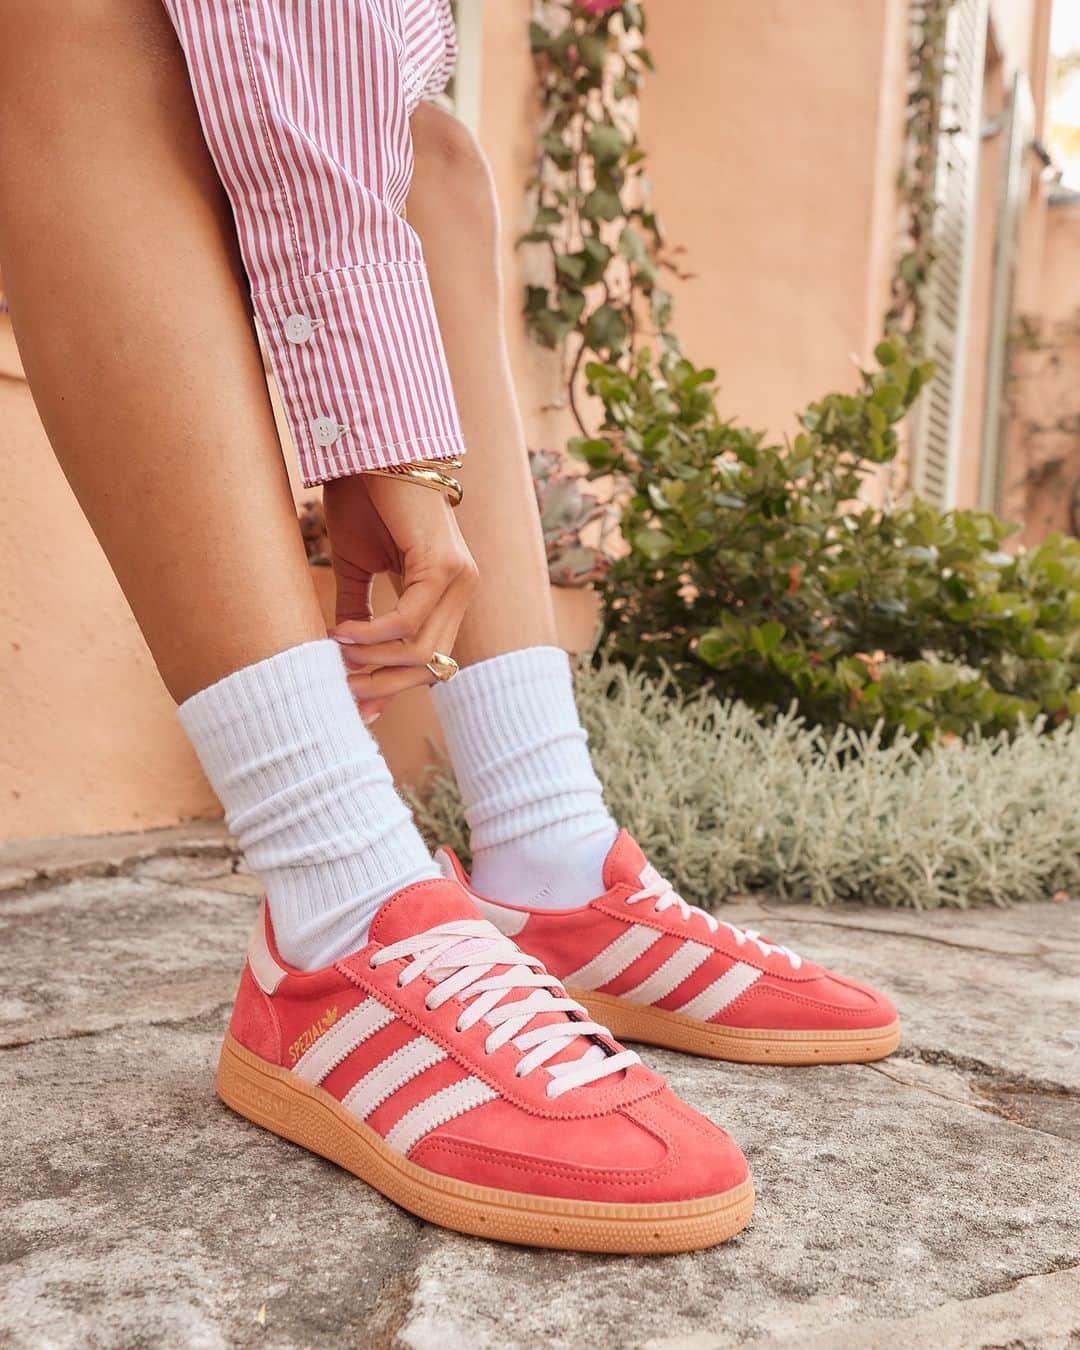 STYLERUNNERのインスタグラム：「Your daily dose of adidas 🧡 The latest adidas Originals Handball Spezial have our hearts. Now available online & select stores!  Green  👟 Sydney CBD, Double Bay, Armadale, Brighton. Coming soon to Highpoint, Claremont, Newmarket NZ  Red 👟 Sydney CBD, Double Bay, Armadale. Coming soon to Highpoint, Brighton, Claremont, Pac Fair, Newmarket NZ」